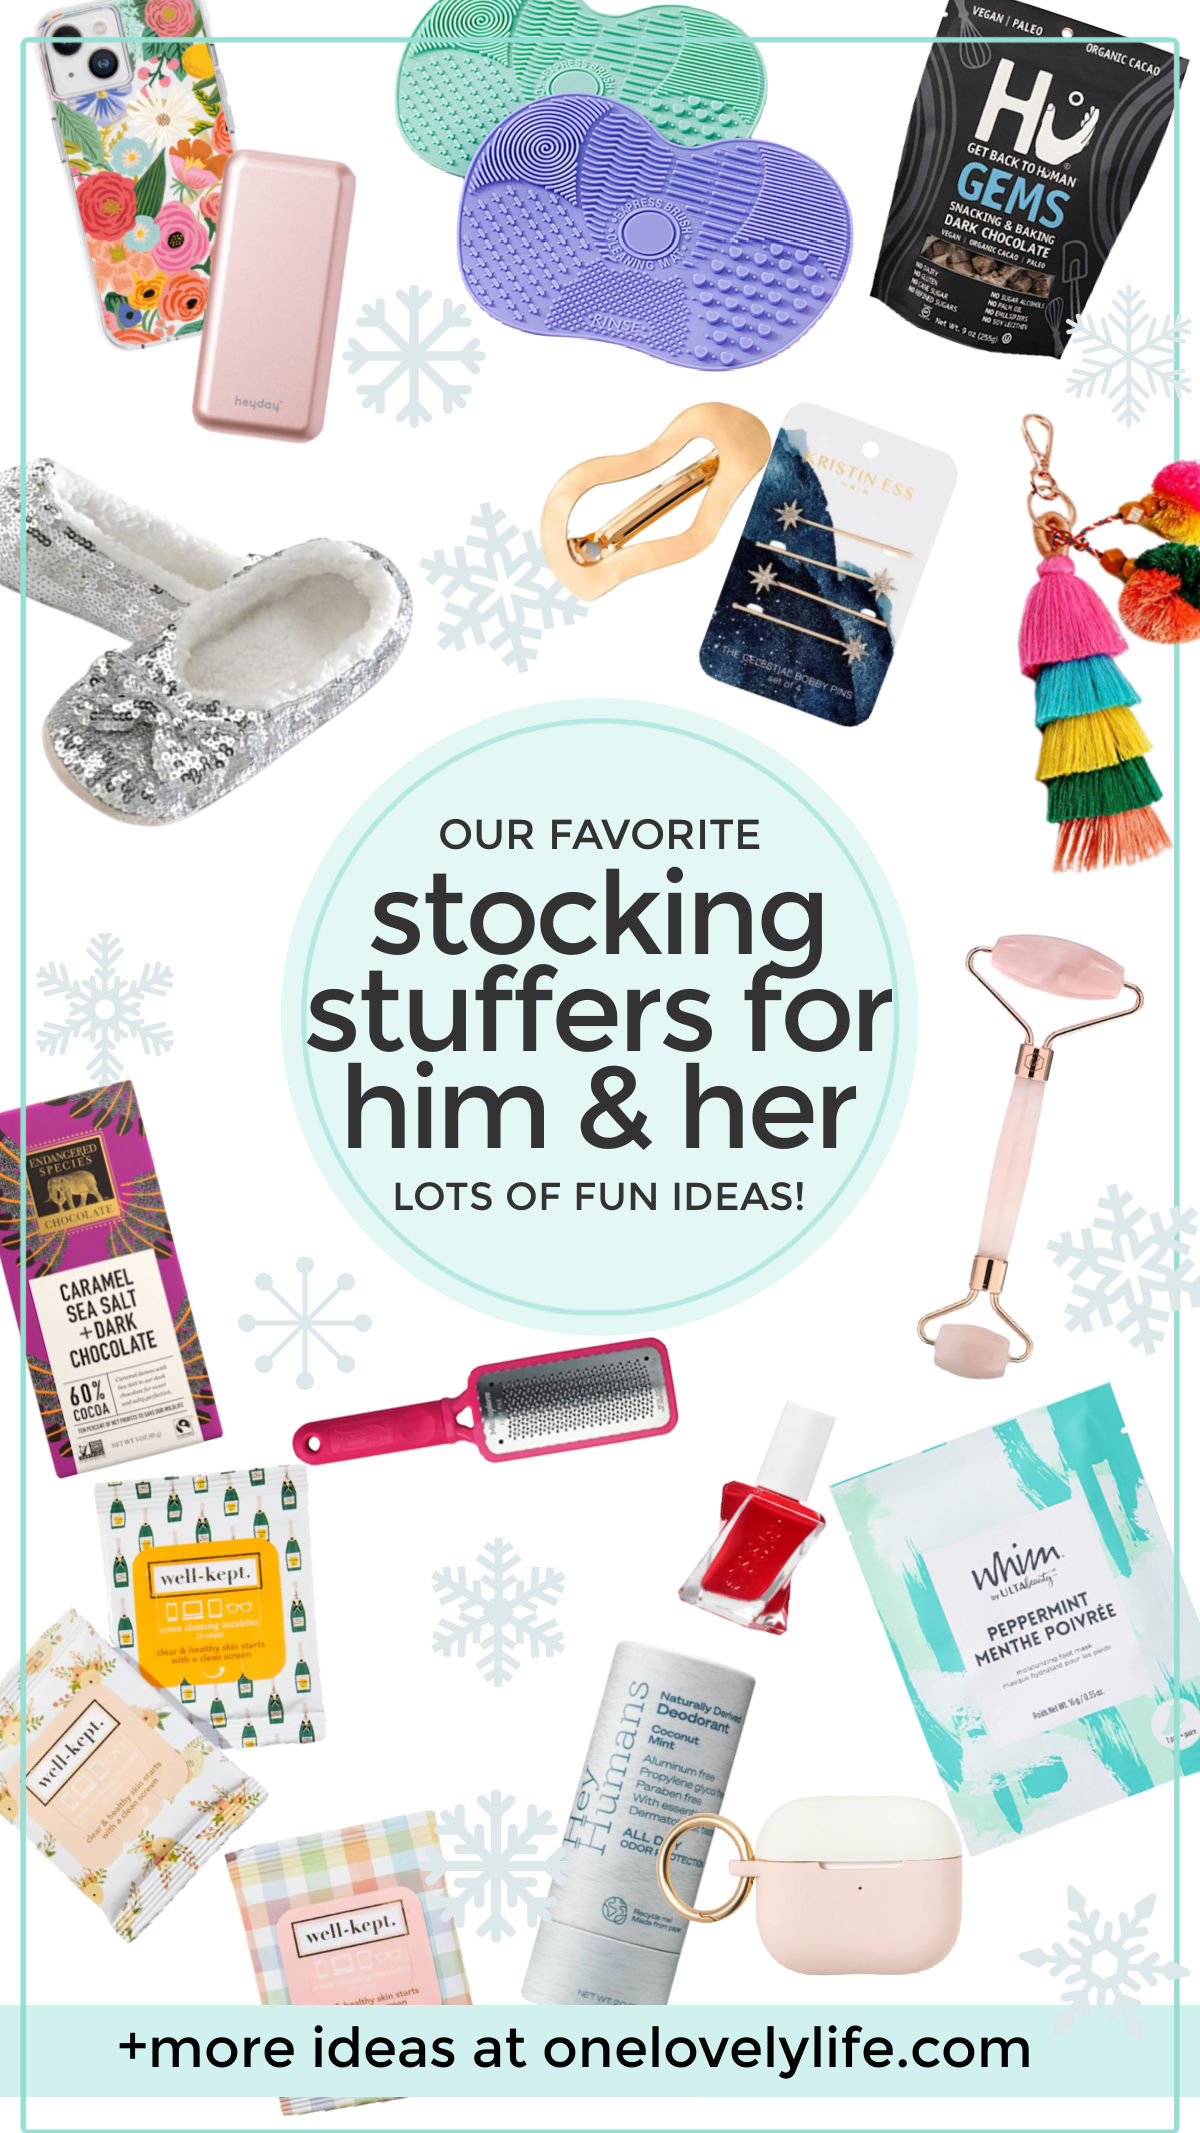 Stocking Stuffer Ideas for Him and Her - Make stocking stuffers steal the show this year with these great stocking stuffers for him and her! // Stocking Stuffers for Men // Stocking Stuffers for Women // Stocking Stuffers for Husbands // Stocking Stuffers for Wife // Stocking Stuffers for teens // Stocking Stuffers For Teenagers #stockingstuffers #giftideas #holidaygiftt #stockings